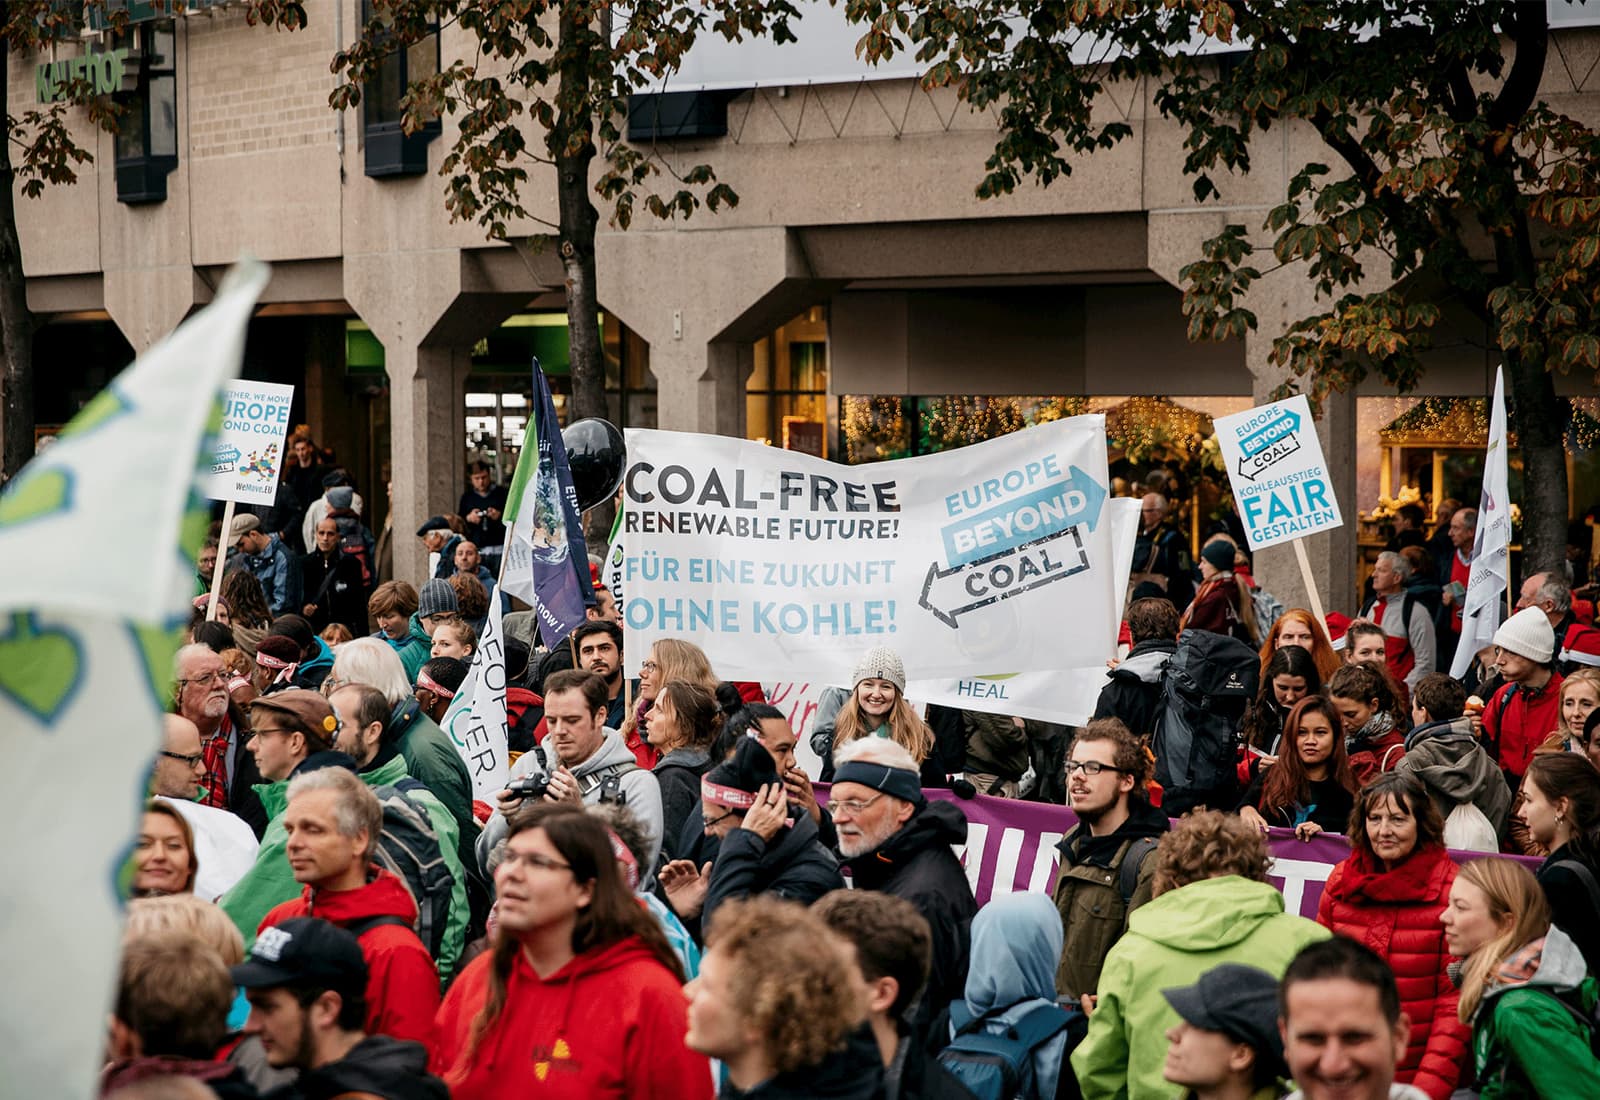 Europe Beyond Coal groups marched after the launch in Bonn, Germany ahead of the COP23 international climate negotiations. Photo credit: Europe Beyond Coal and Felix von der Osten